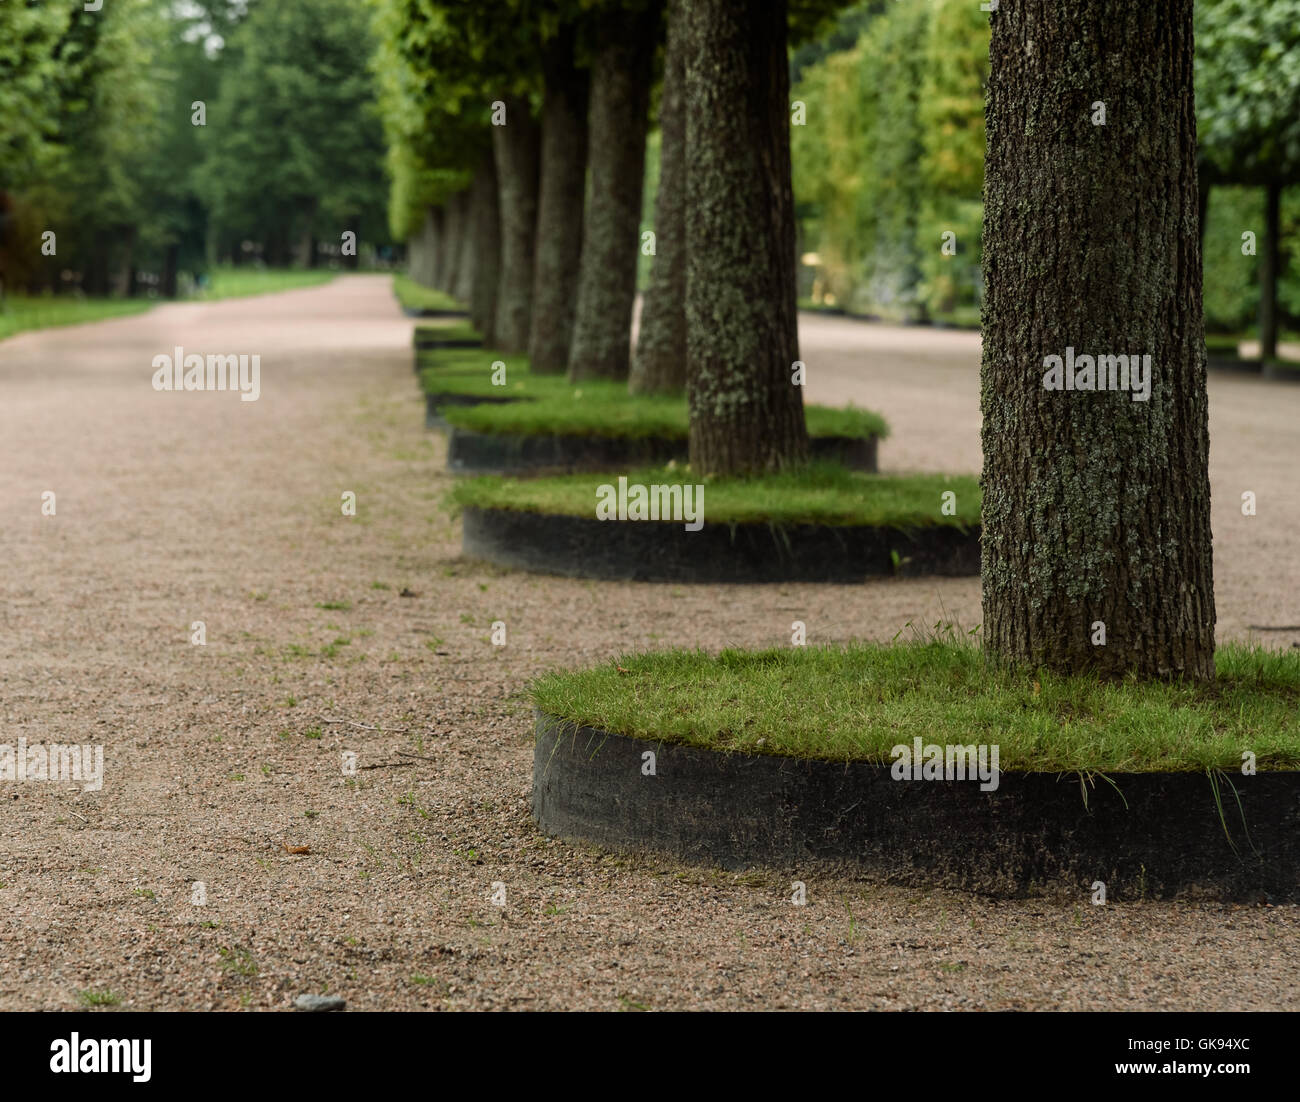 gardening and beautiful smooth trimmed trees in the Park Stock Photo